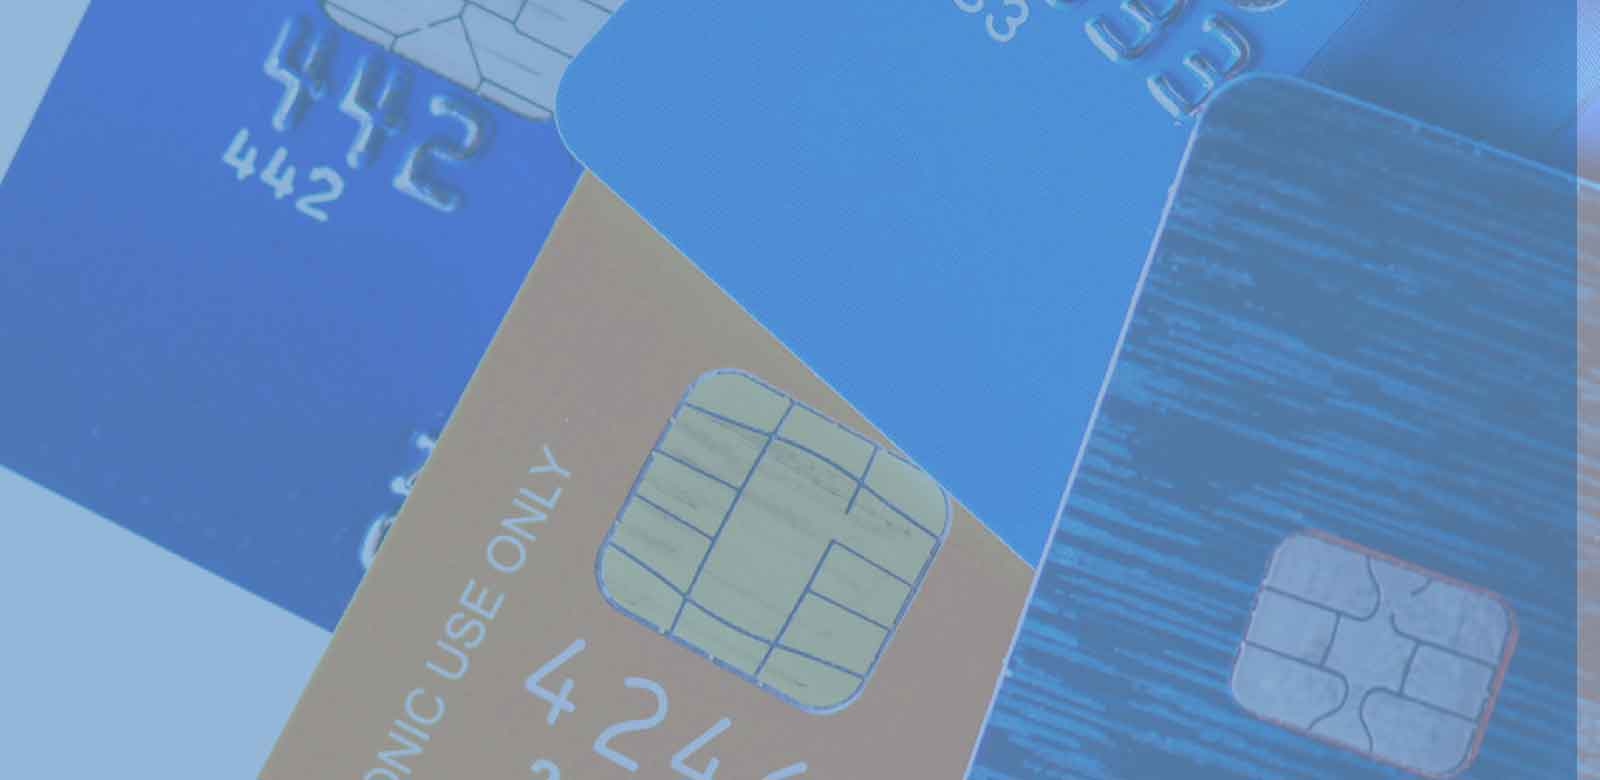 Image of credit card zoomed in on emv chip
